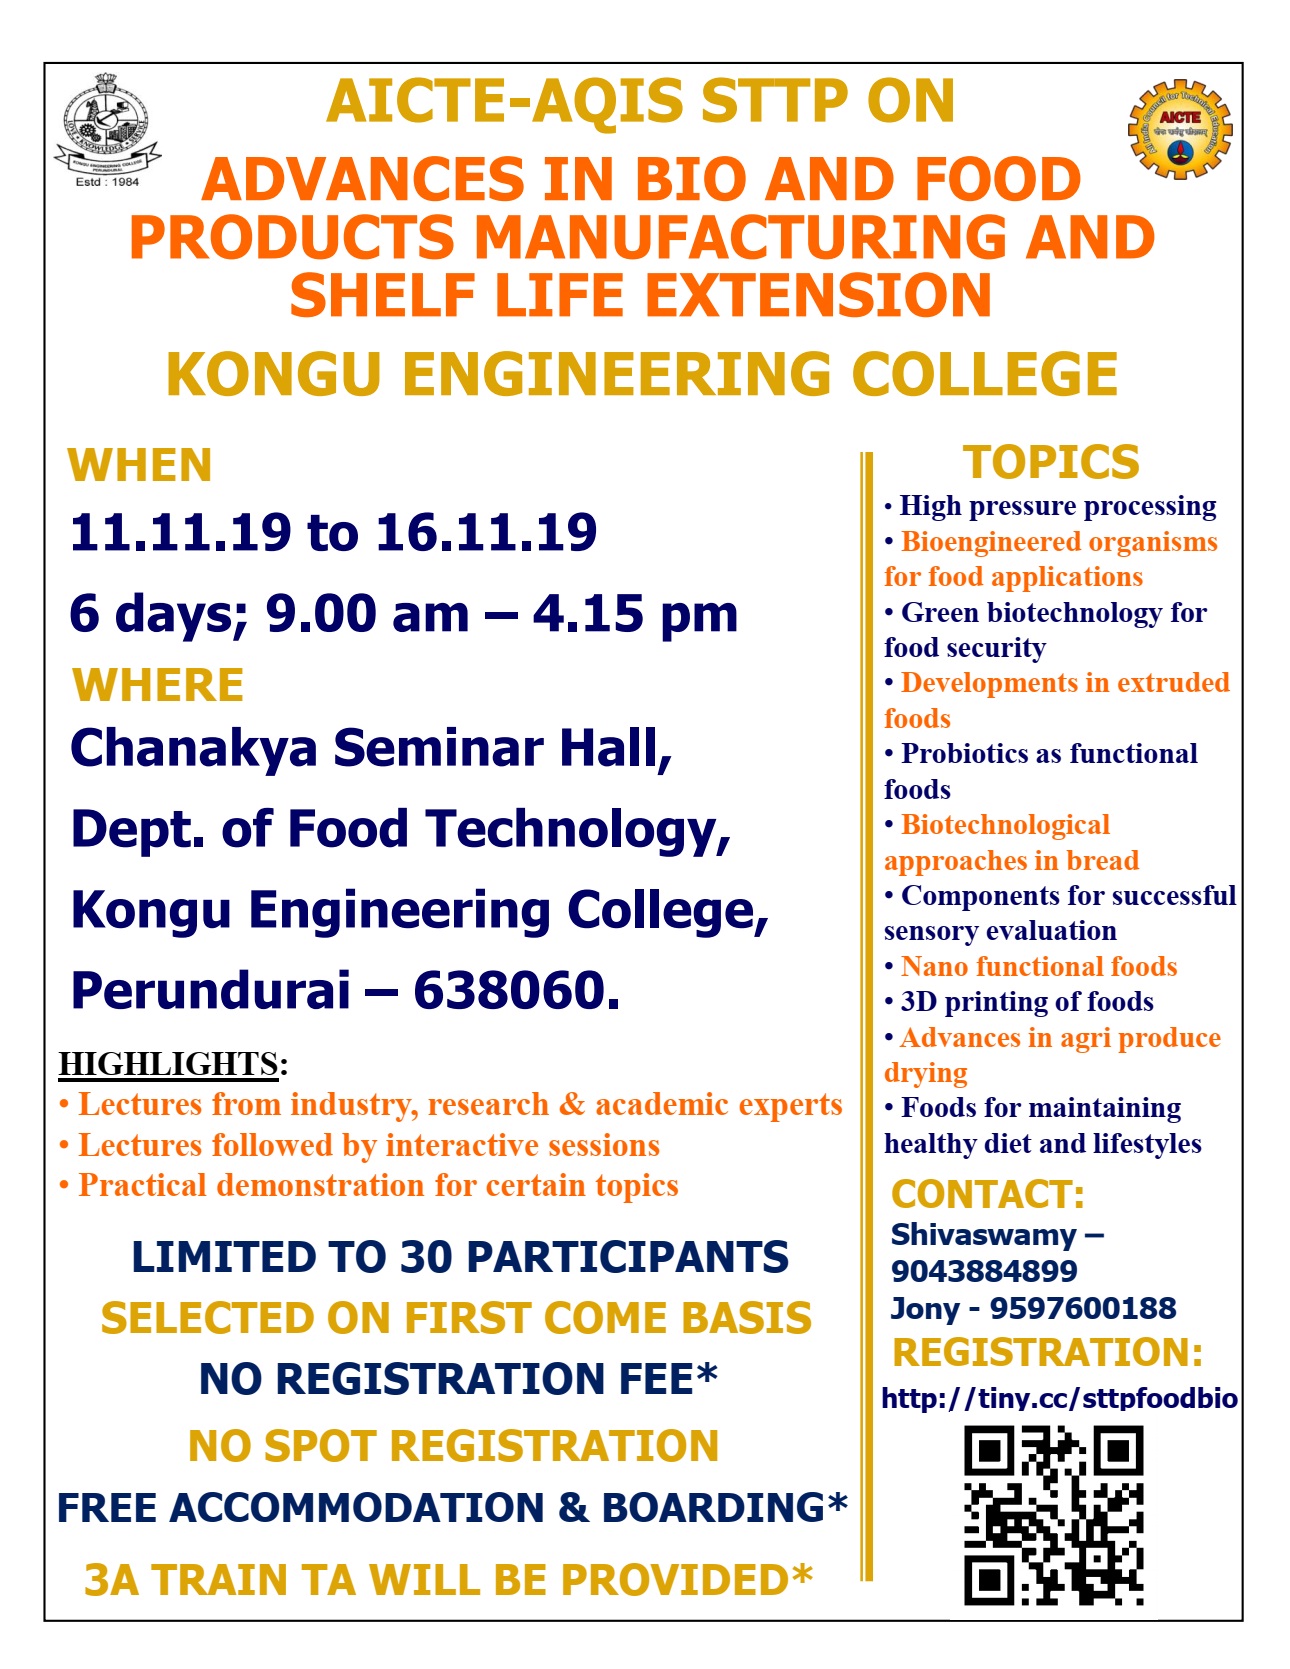 Advances in Bio and Food Products Manufacturing and Shelf Life Extension 2019